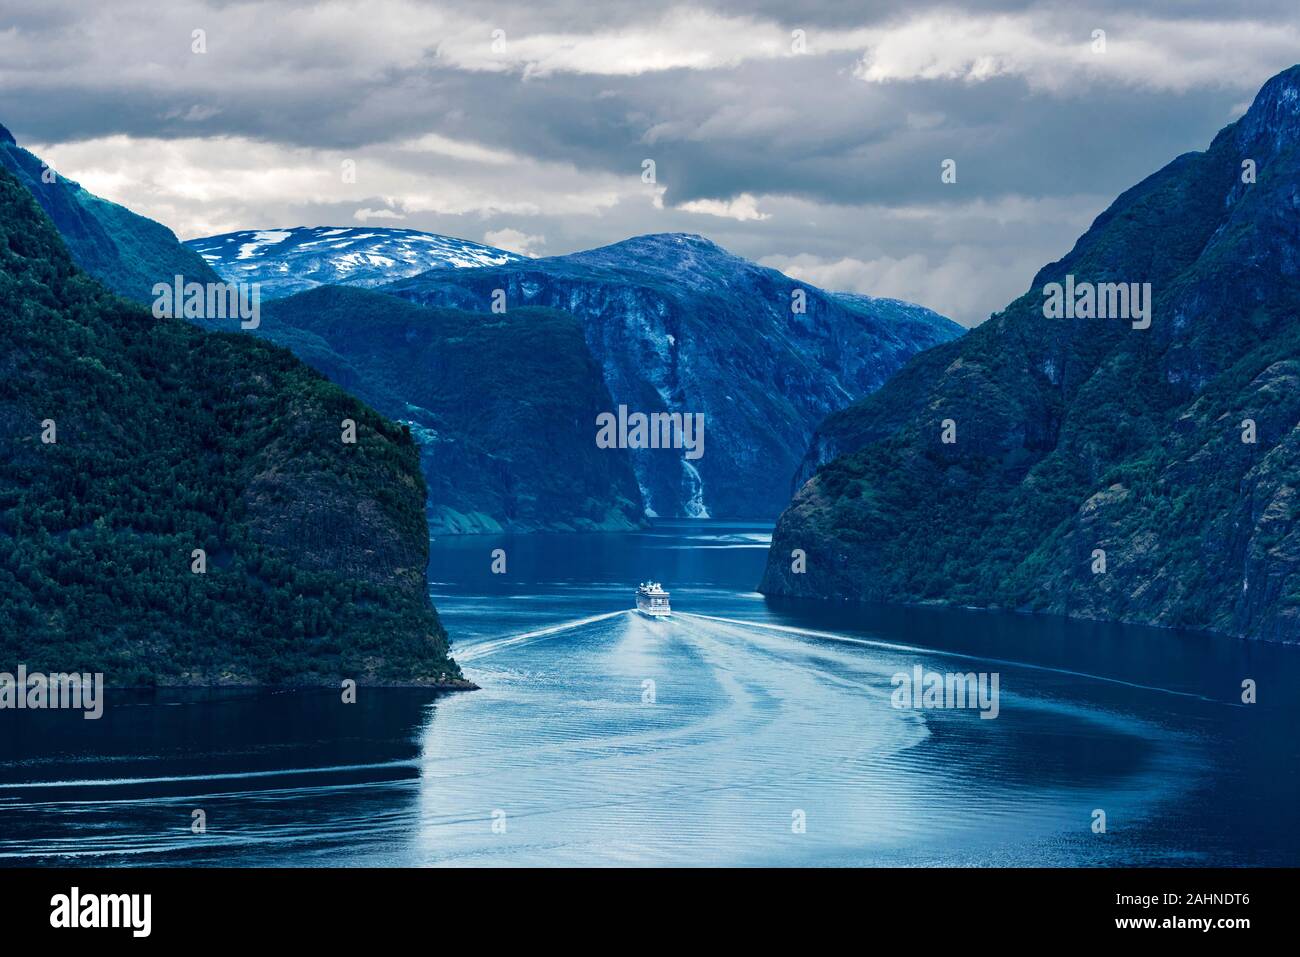 View of Aurlandsfjord from Stegastein viewpoint in Sogn og Fjordane county of Norwey. Cruise ship is moving via Sognefjorden, Norway's longest fjord. Stock Photo